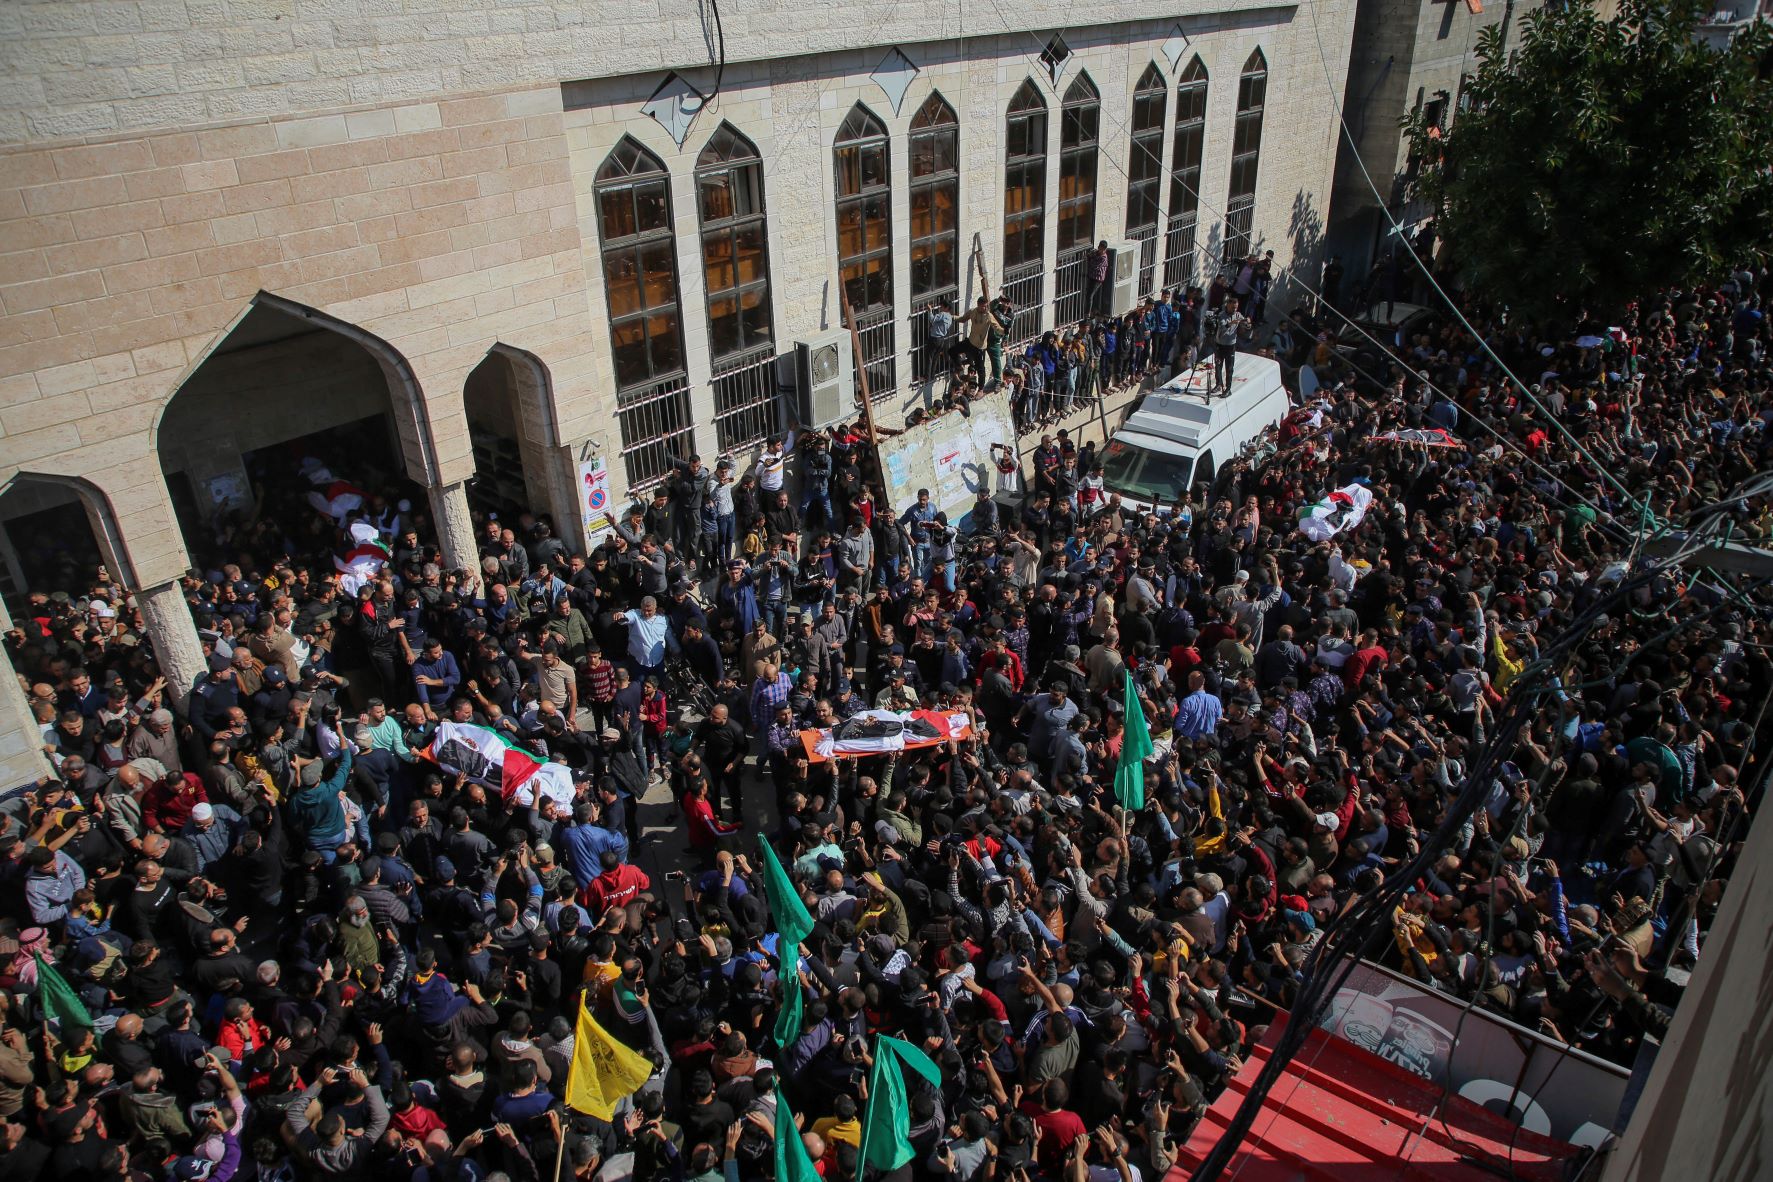 Funeral procession for those killed during the house fire in Gaza (MEE/Mohammed al-Hajjar)